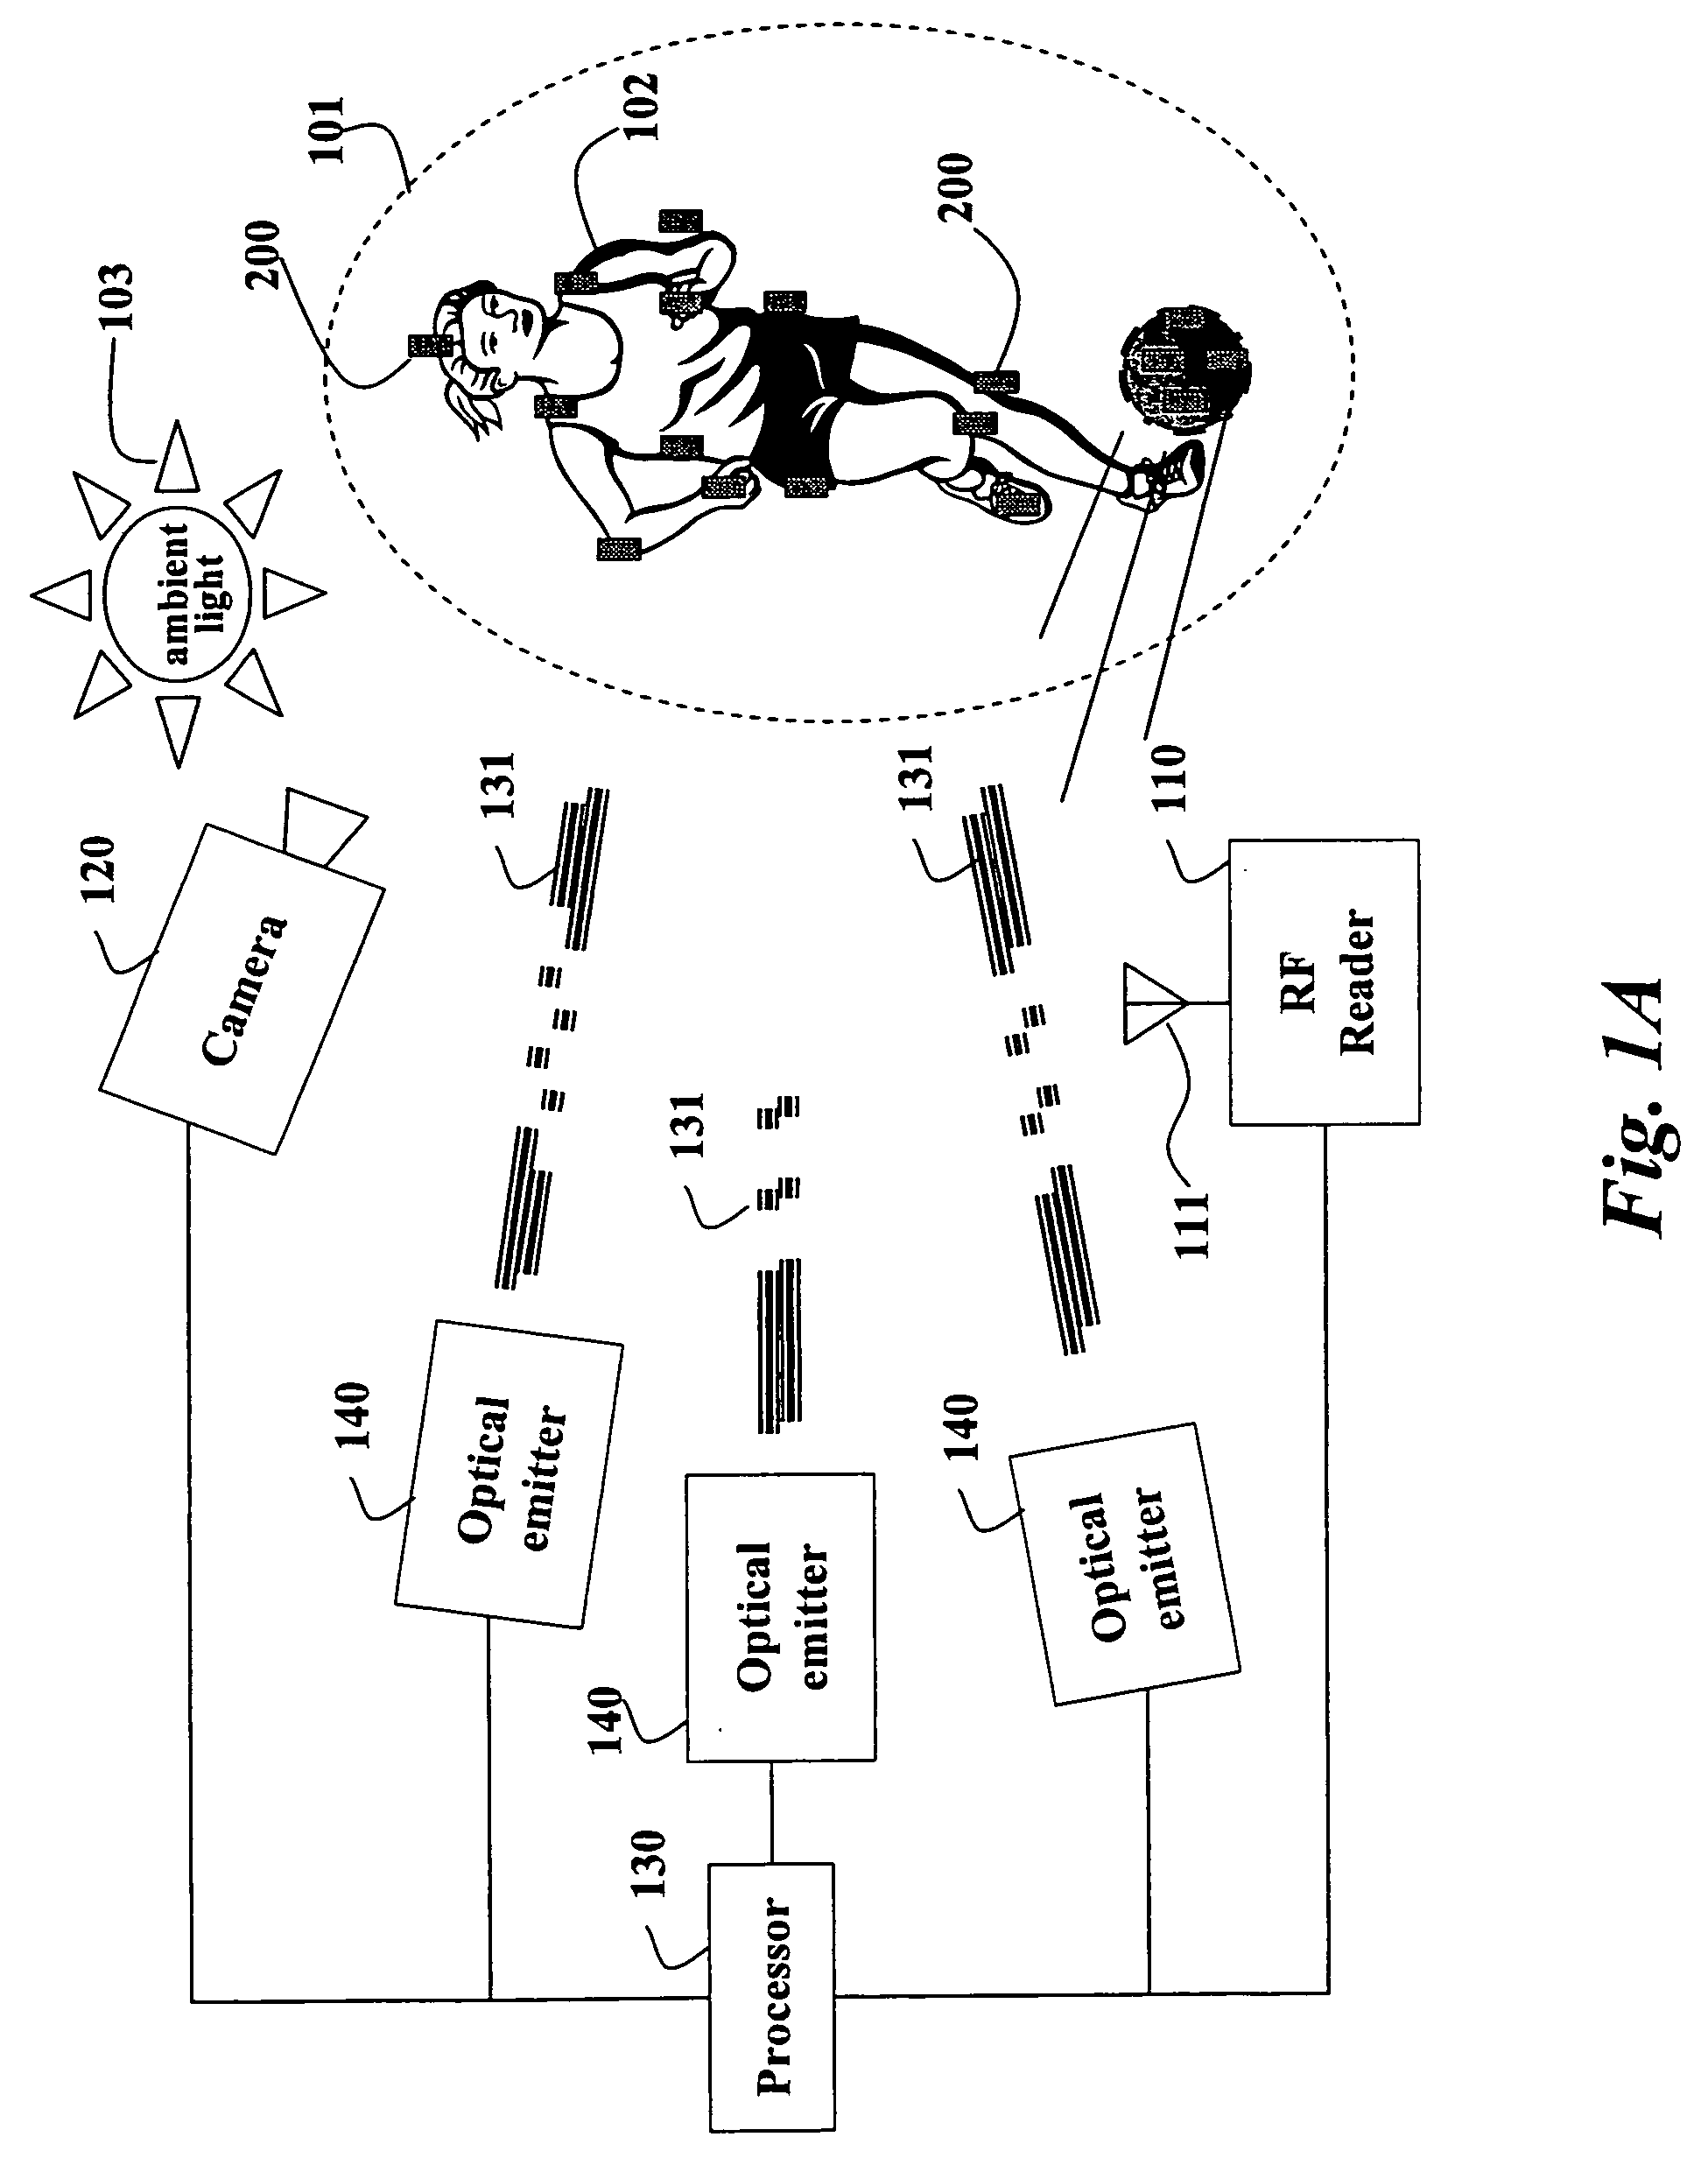 System and method for sensing geometric and photometric attributes of a scene with multiplexed illumination and solid state optical devices